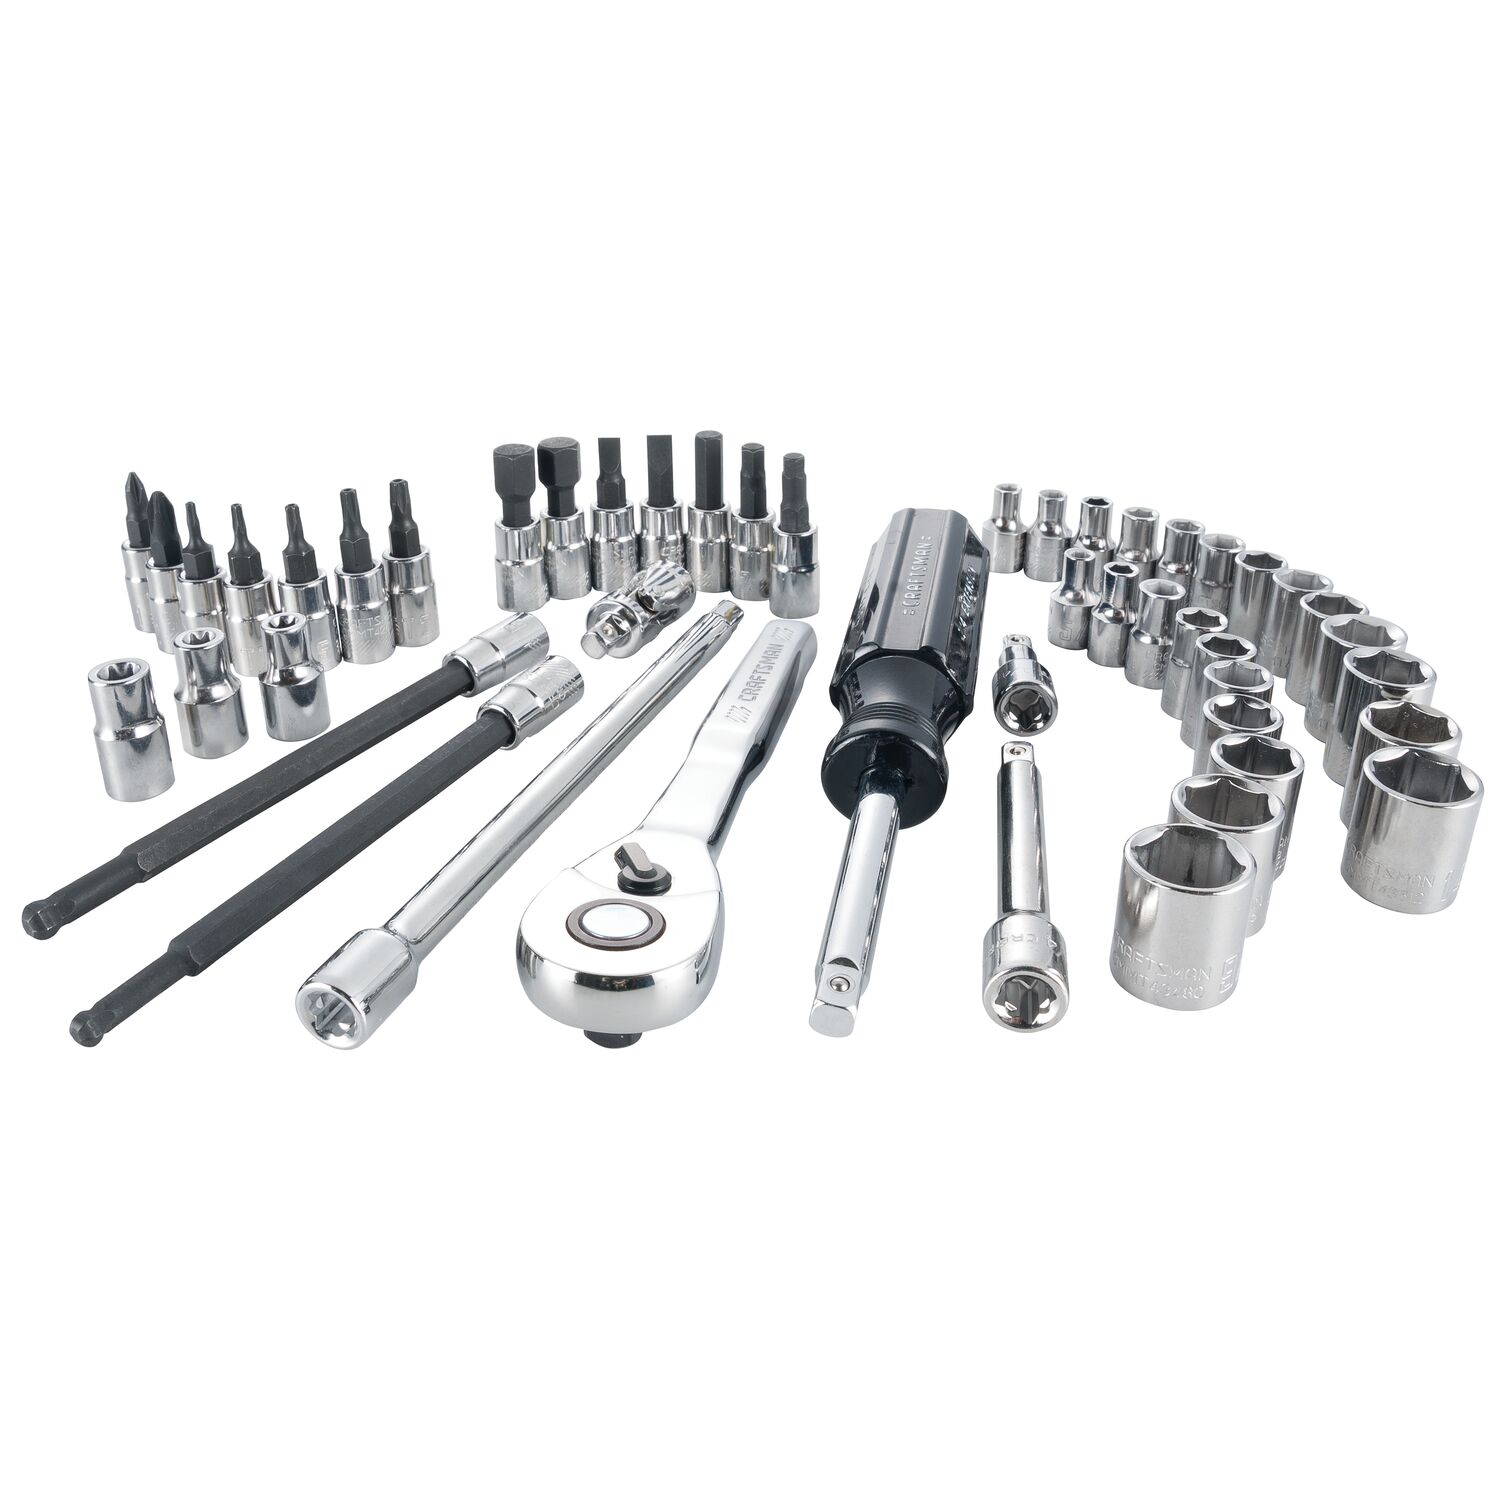 CRAFTSMAN 48-Piece Standard (SAE) and Metric Combination Polished